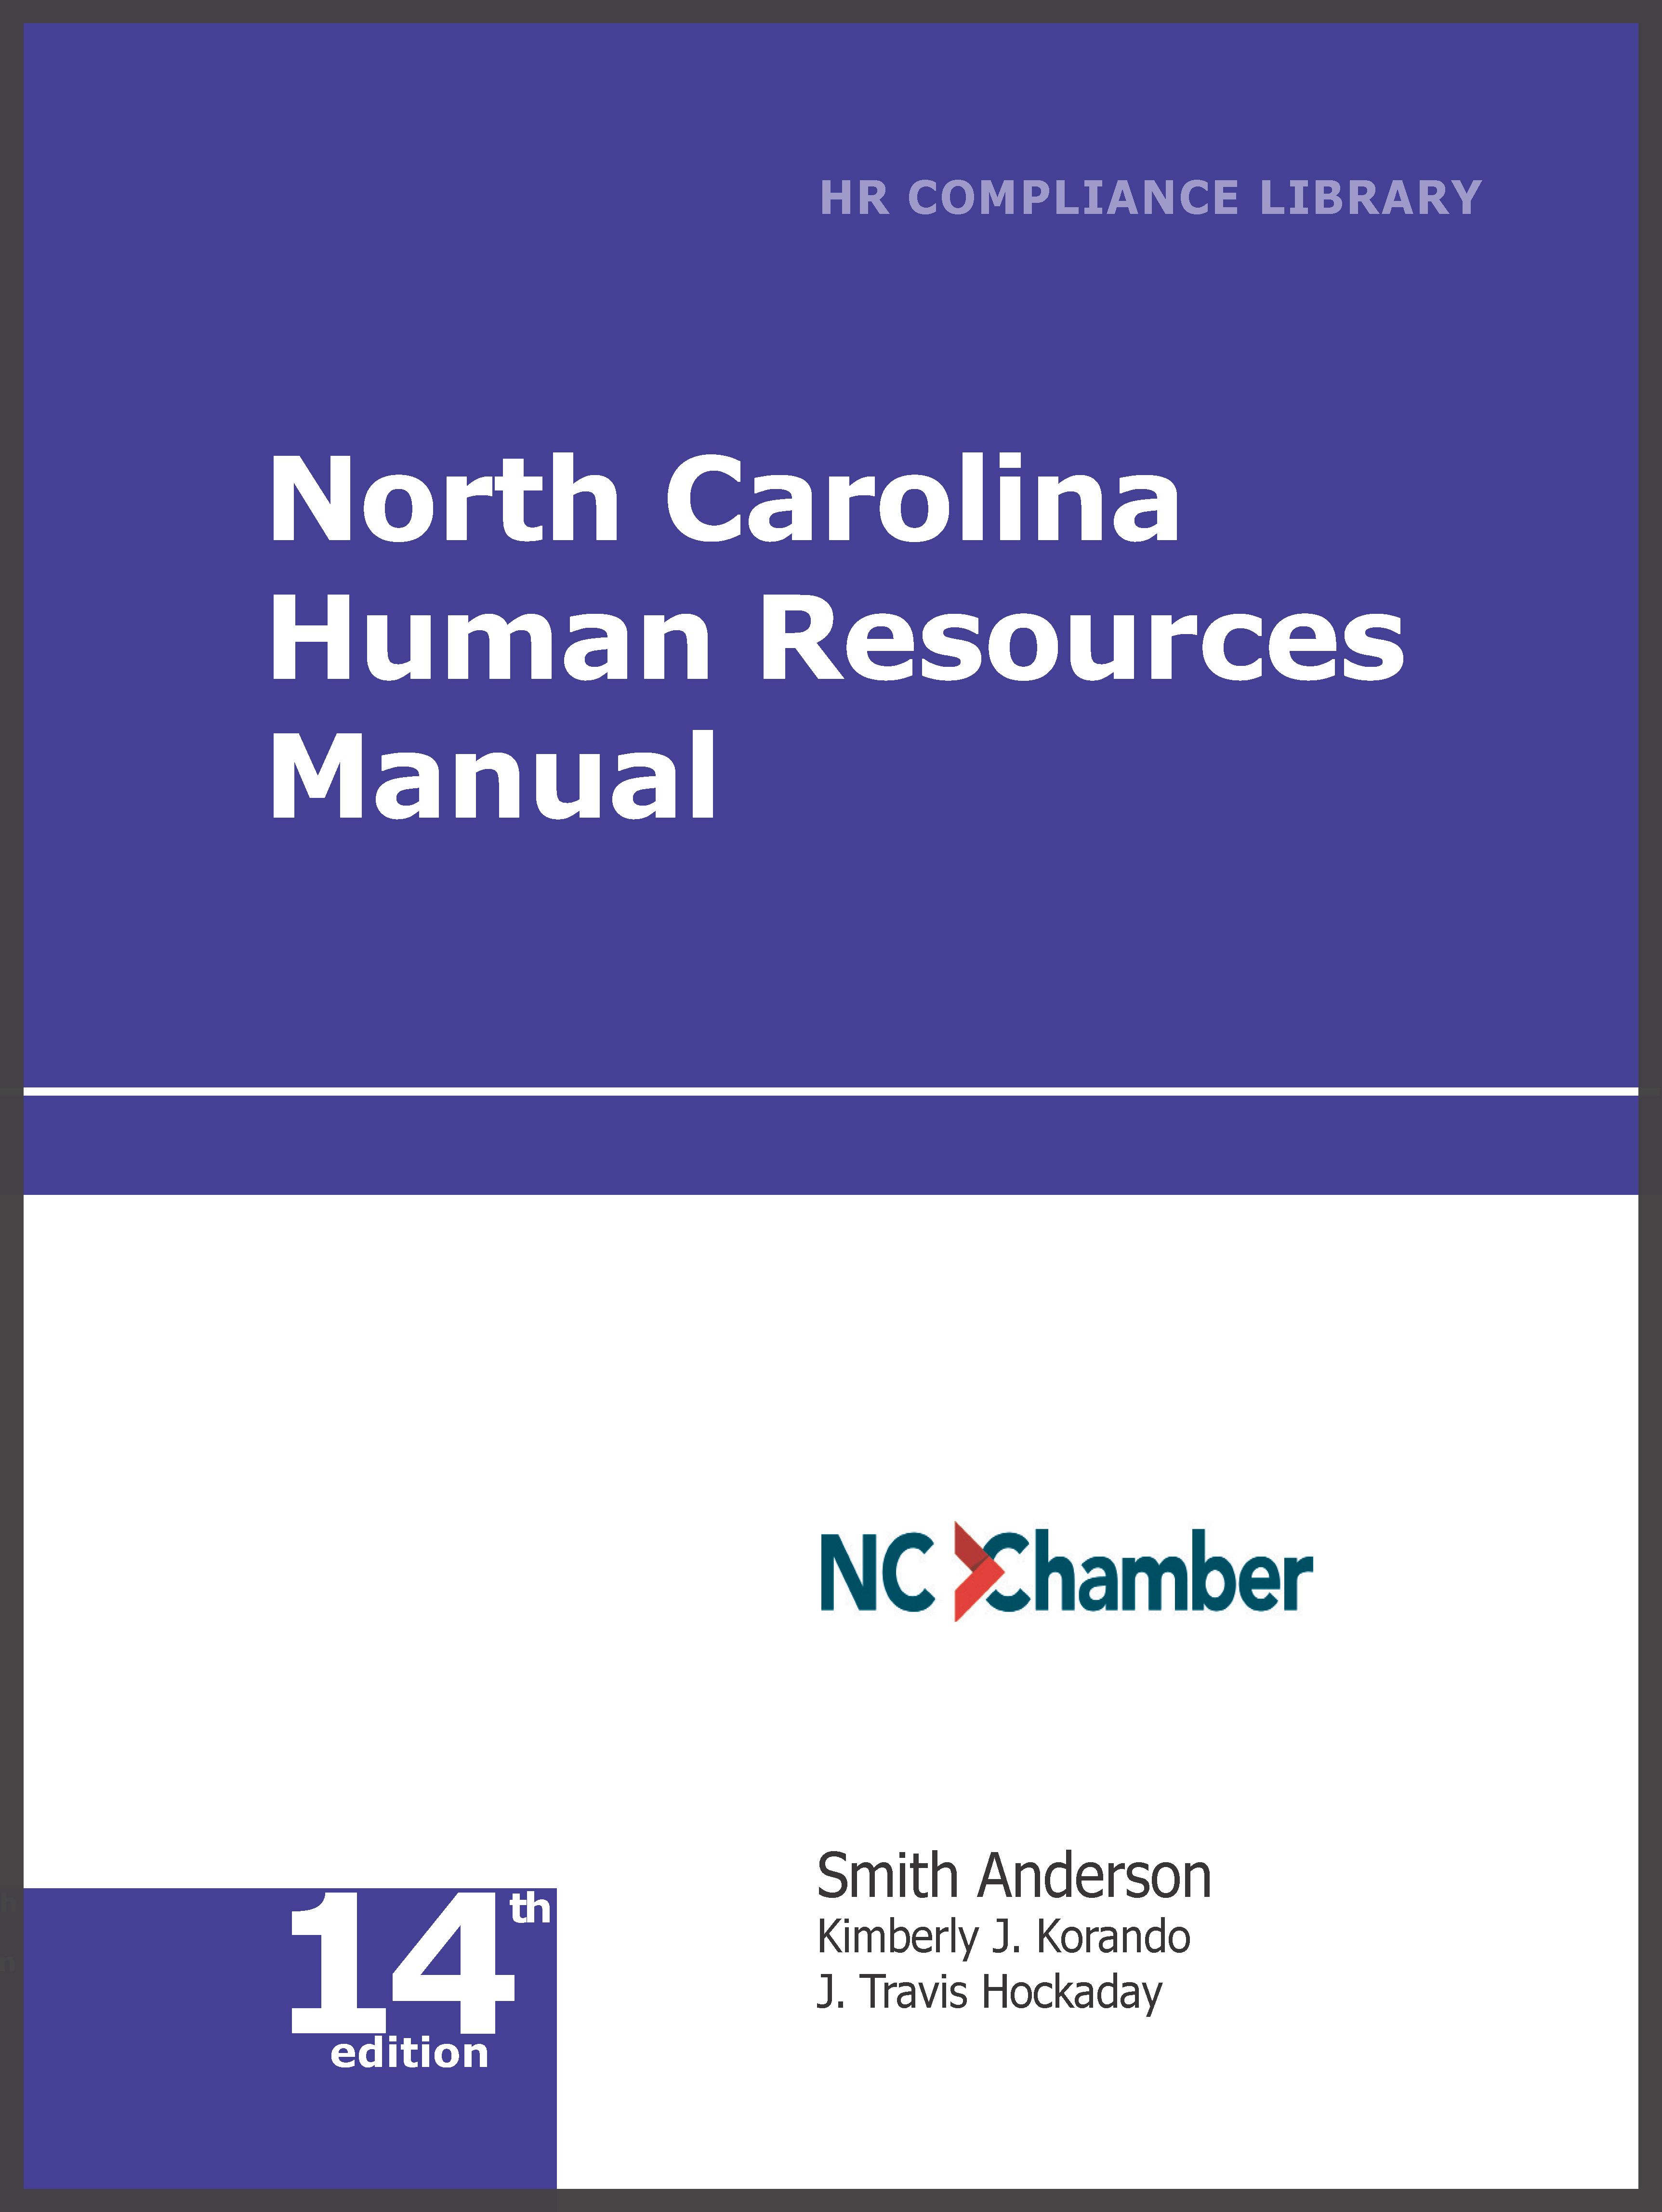 North Carolina Human Resources Library—Online Only employment law image, remote work, labor laws, employment laws, right to work, order of protection, minimum wage